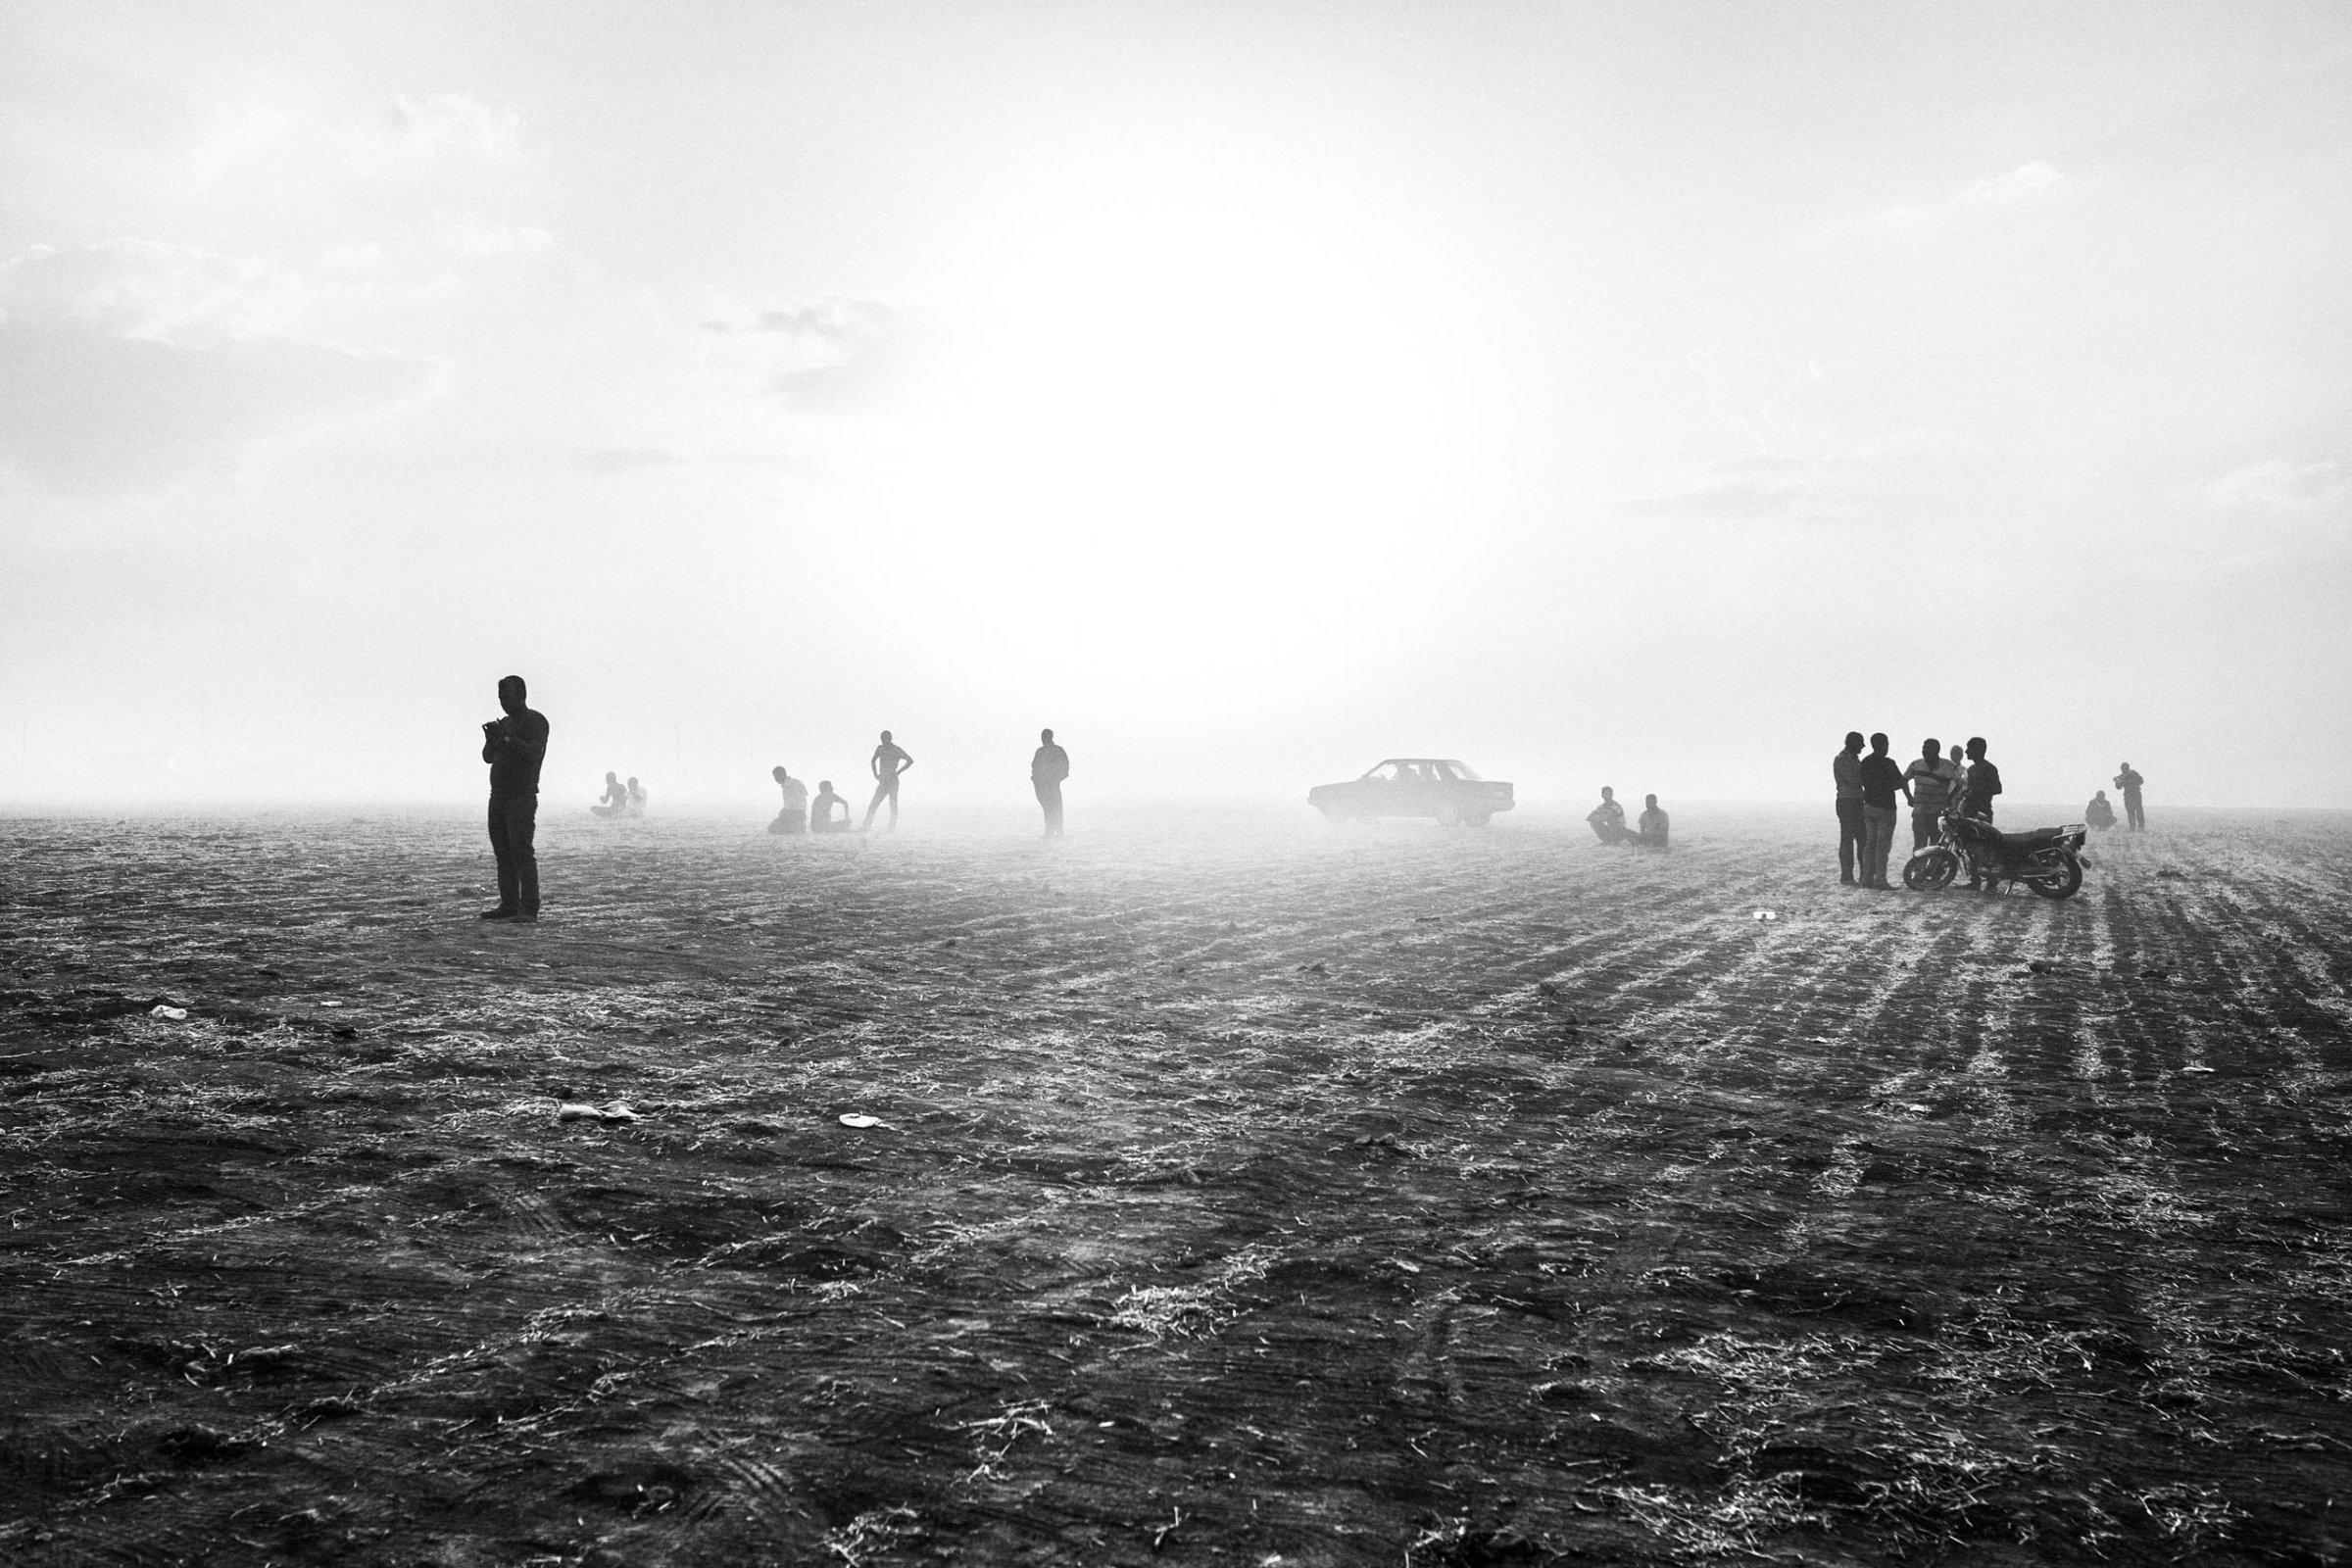 Kurdish Syrian refugees from kobani, Syria wait near the Turkish-Syrian border, Sept. 2014, as the Islamic State of Iraq (ISIS) began an attack on the city, eventually overtaking it in Oct. 2014. Children and elderly crossed mine fields separating Kobani from the Turkish border, in an effort to flee the fighting. According to UNHCR, 170,000 inhabitants of Kobani took refuge in the camps in Turkey.